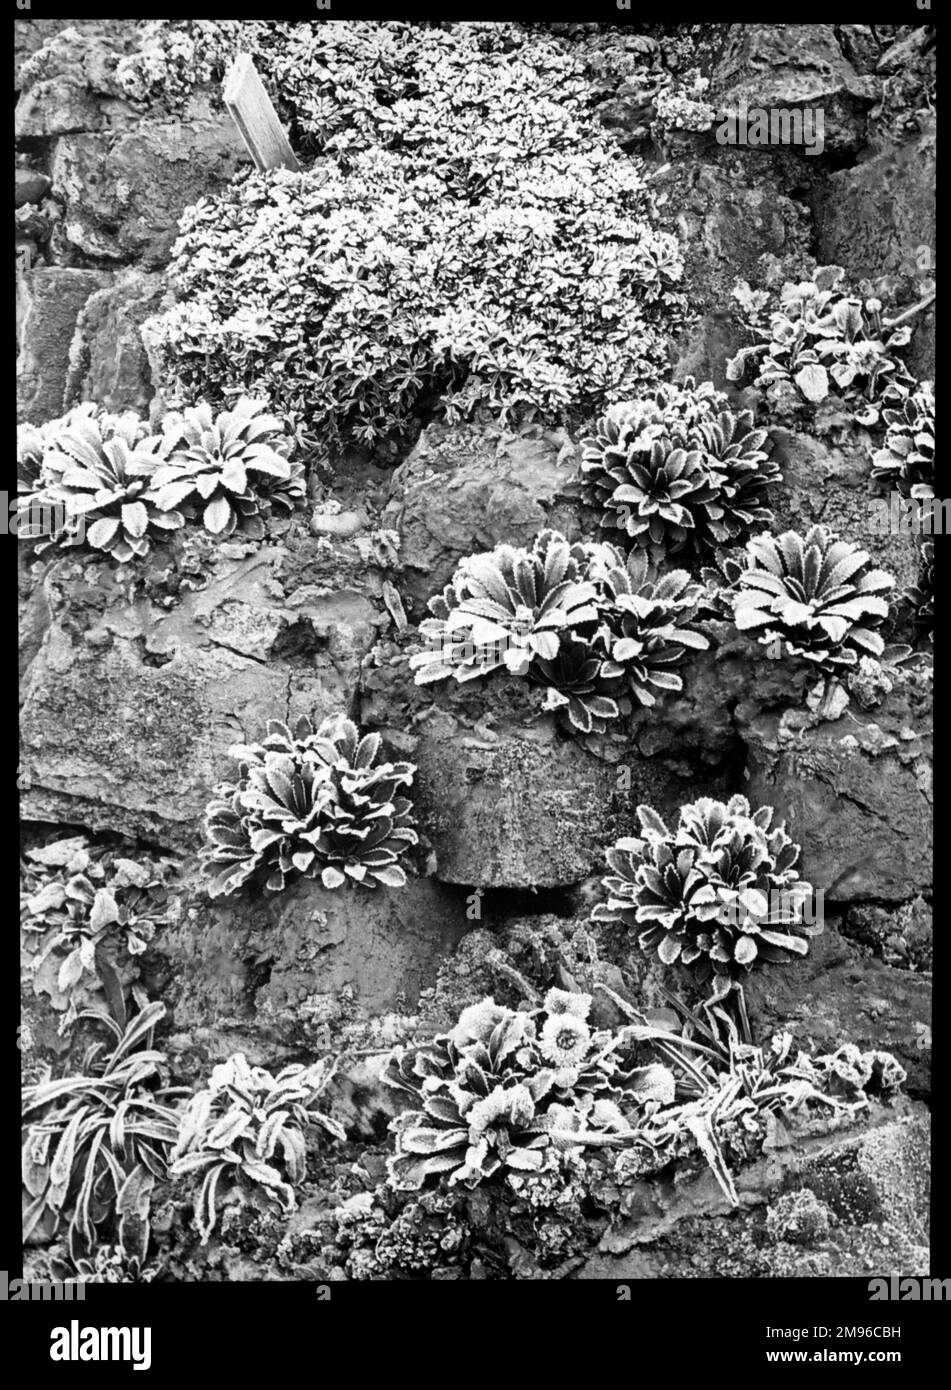 Saxifraga Andrewsii, a perennial of the Saxifragaceae family (commonly known as saxifrages or stone breakers because of their ability to grow in the cracks between rocks).  Seen here in a rocky setting, covered with frost. Stock Photo